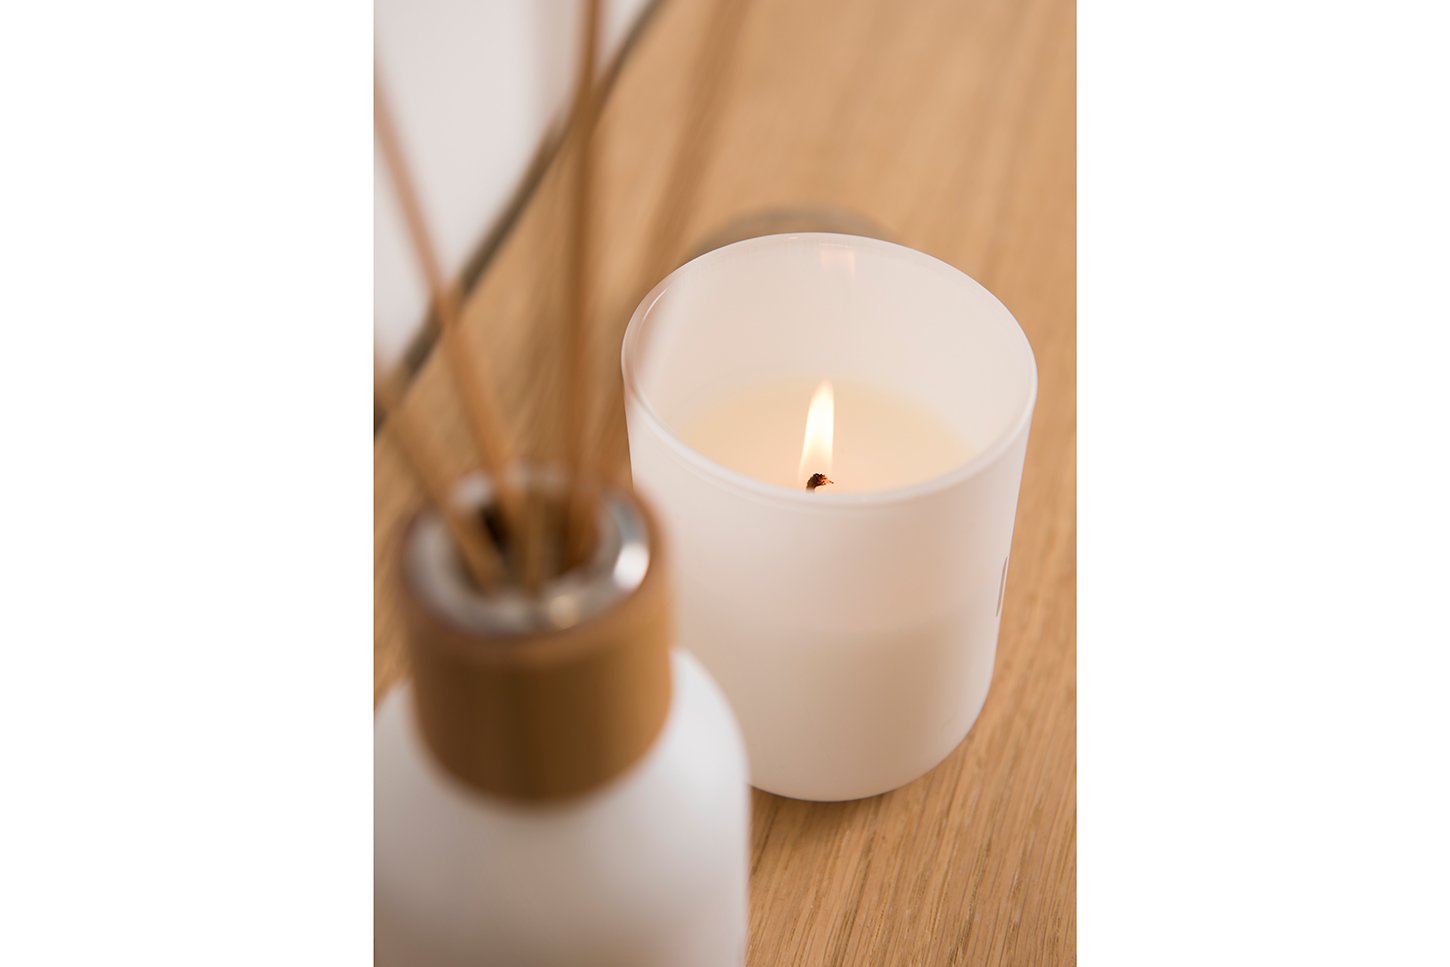 Birch Scented Candle - Rento